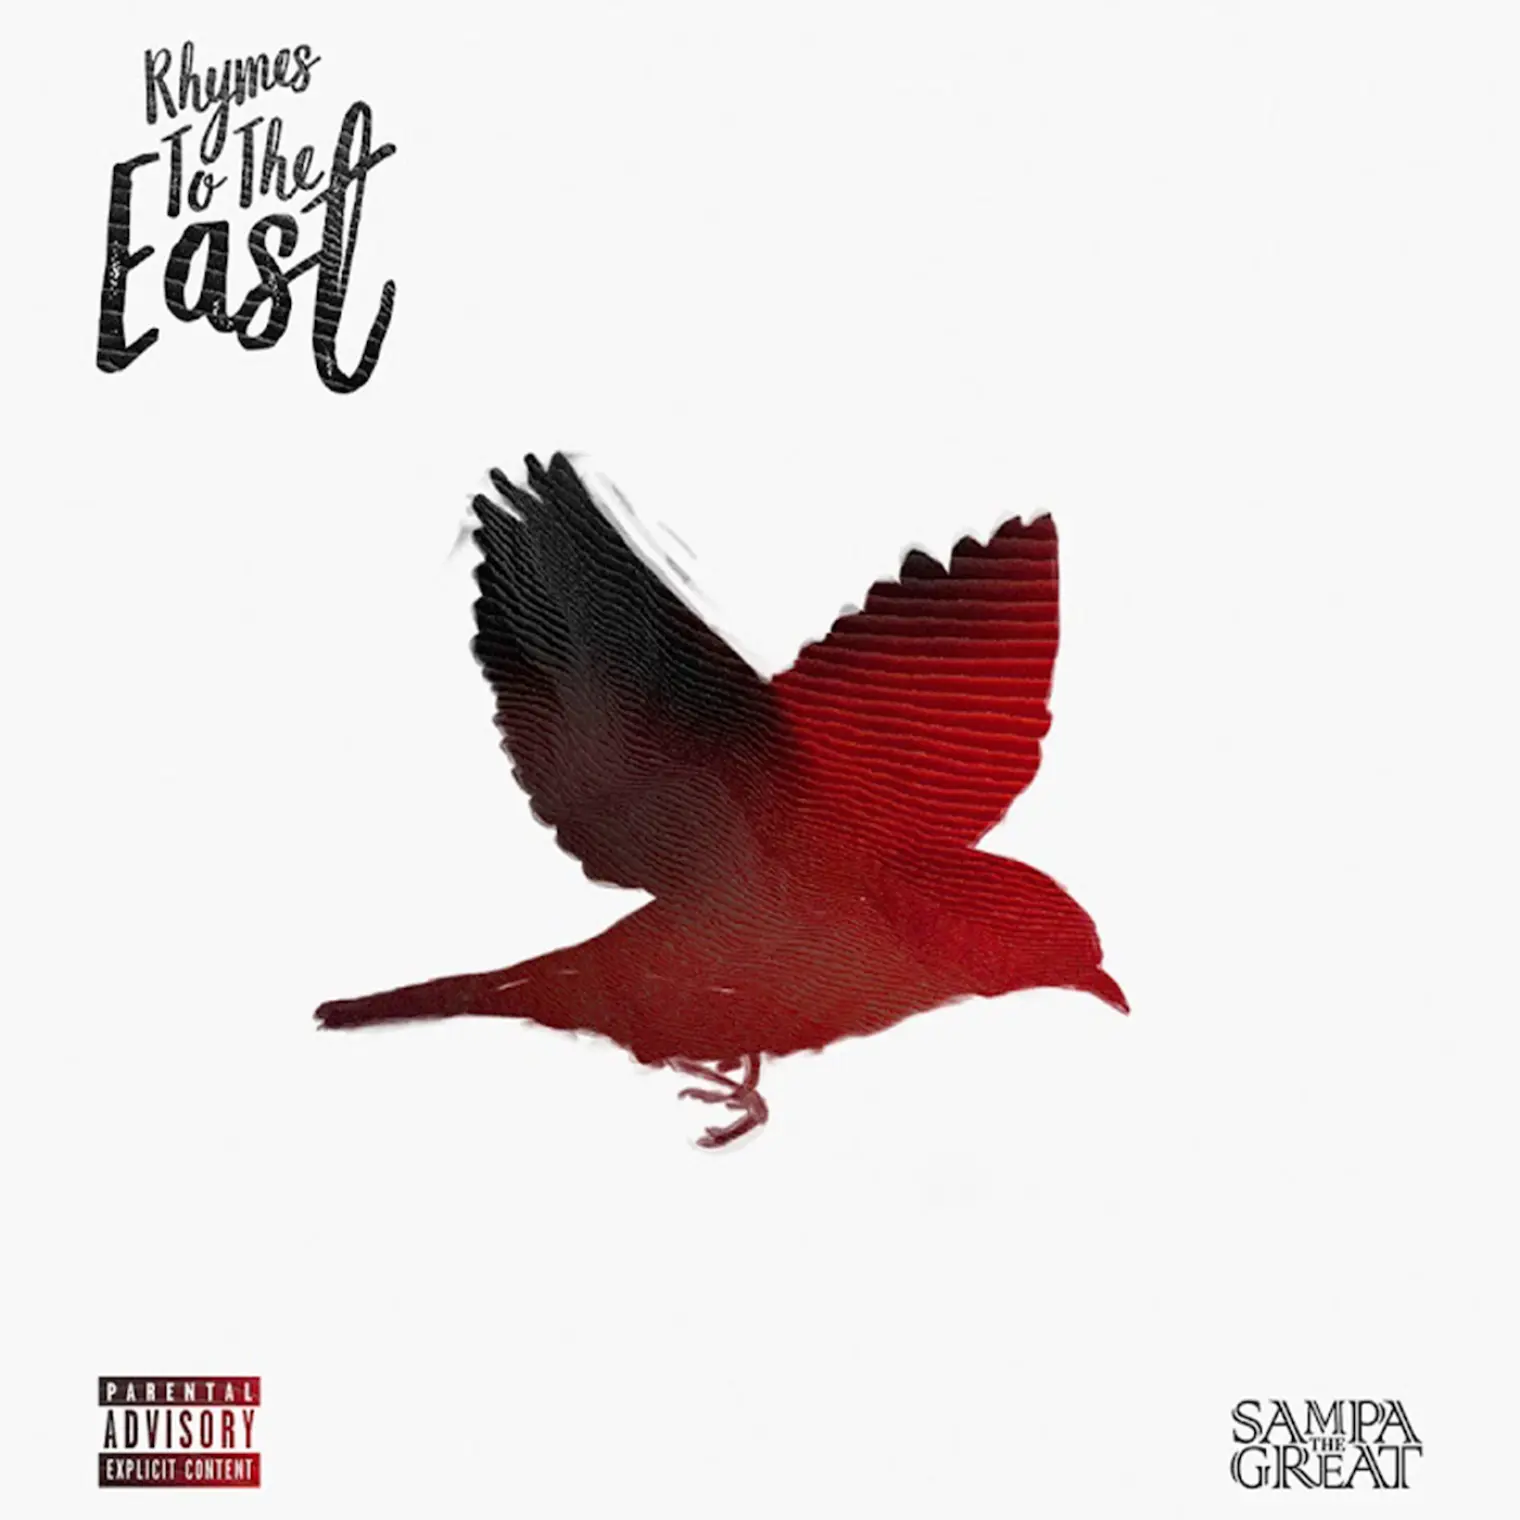 Rhymes To The East -  Sampa the Great 